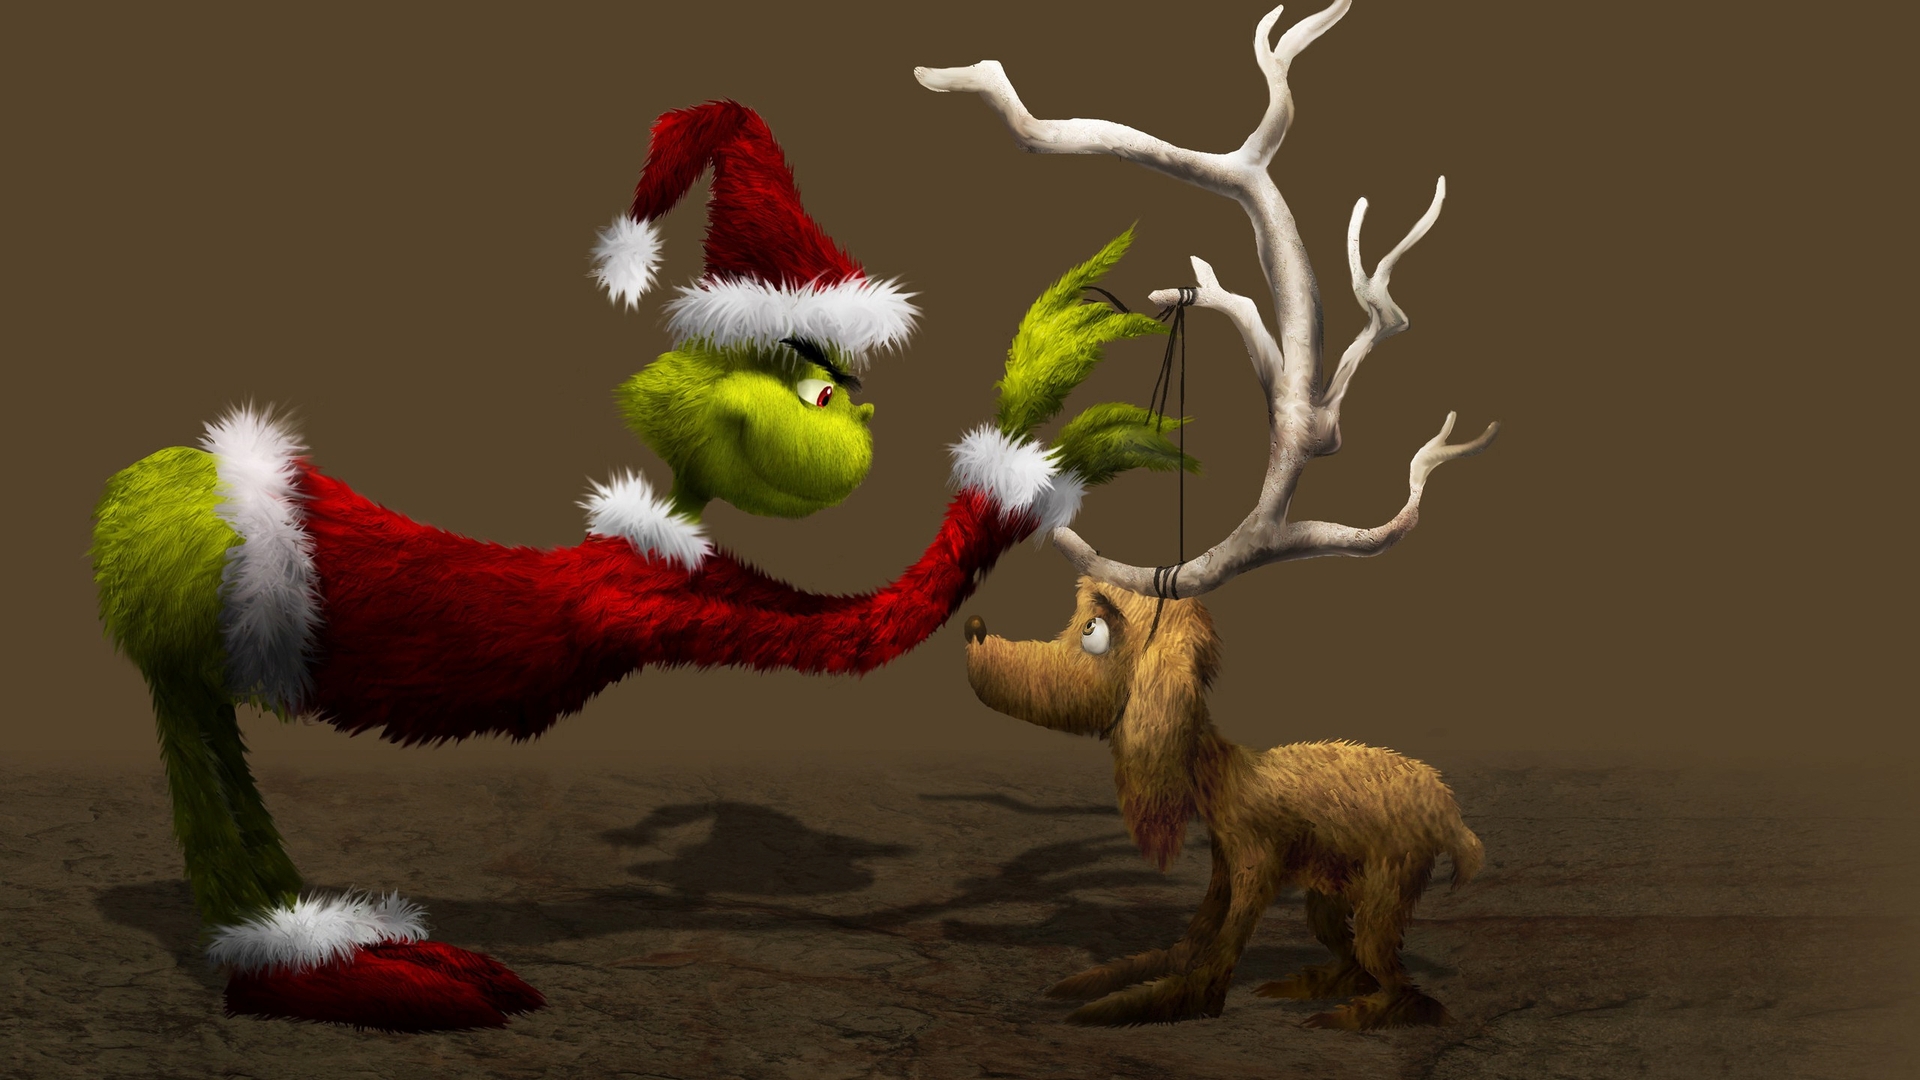 The Grinch Pictures Photos Images and Pics for Facebook Tumblr  Pinterest and Twitter